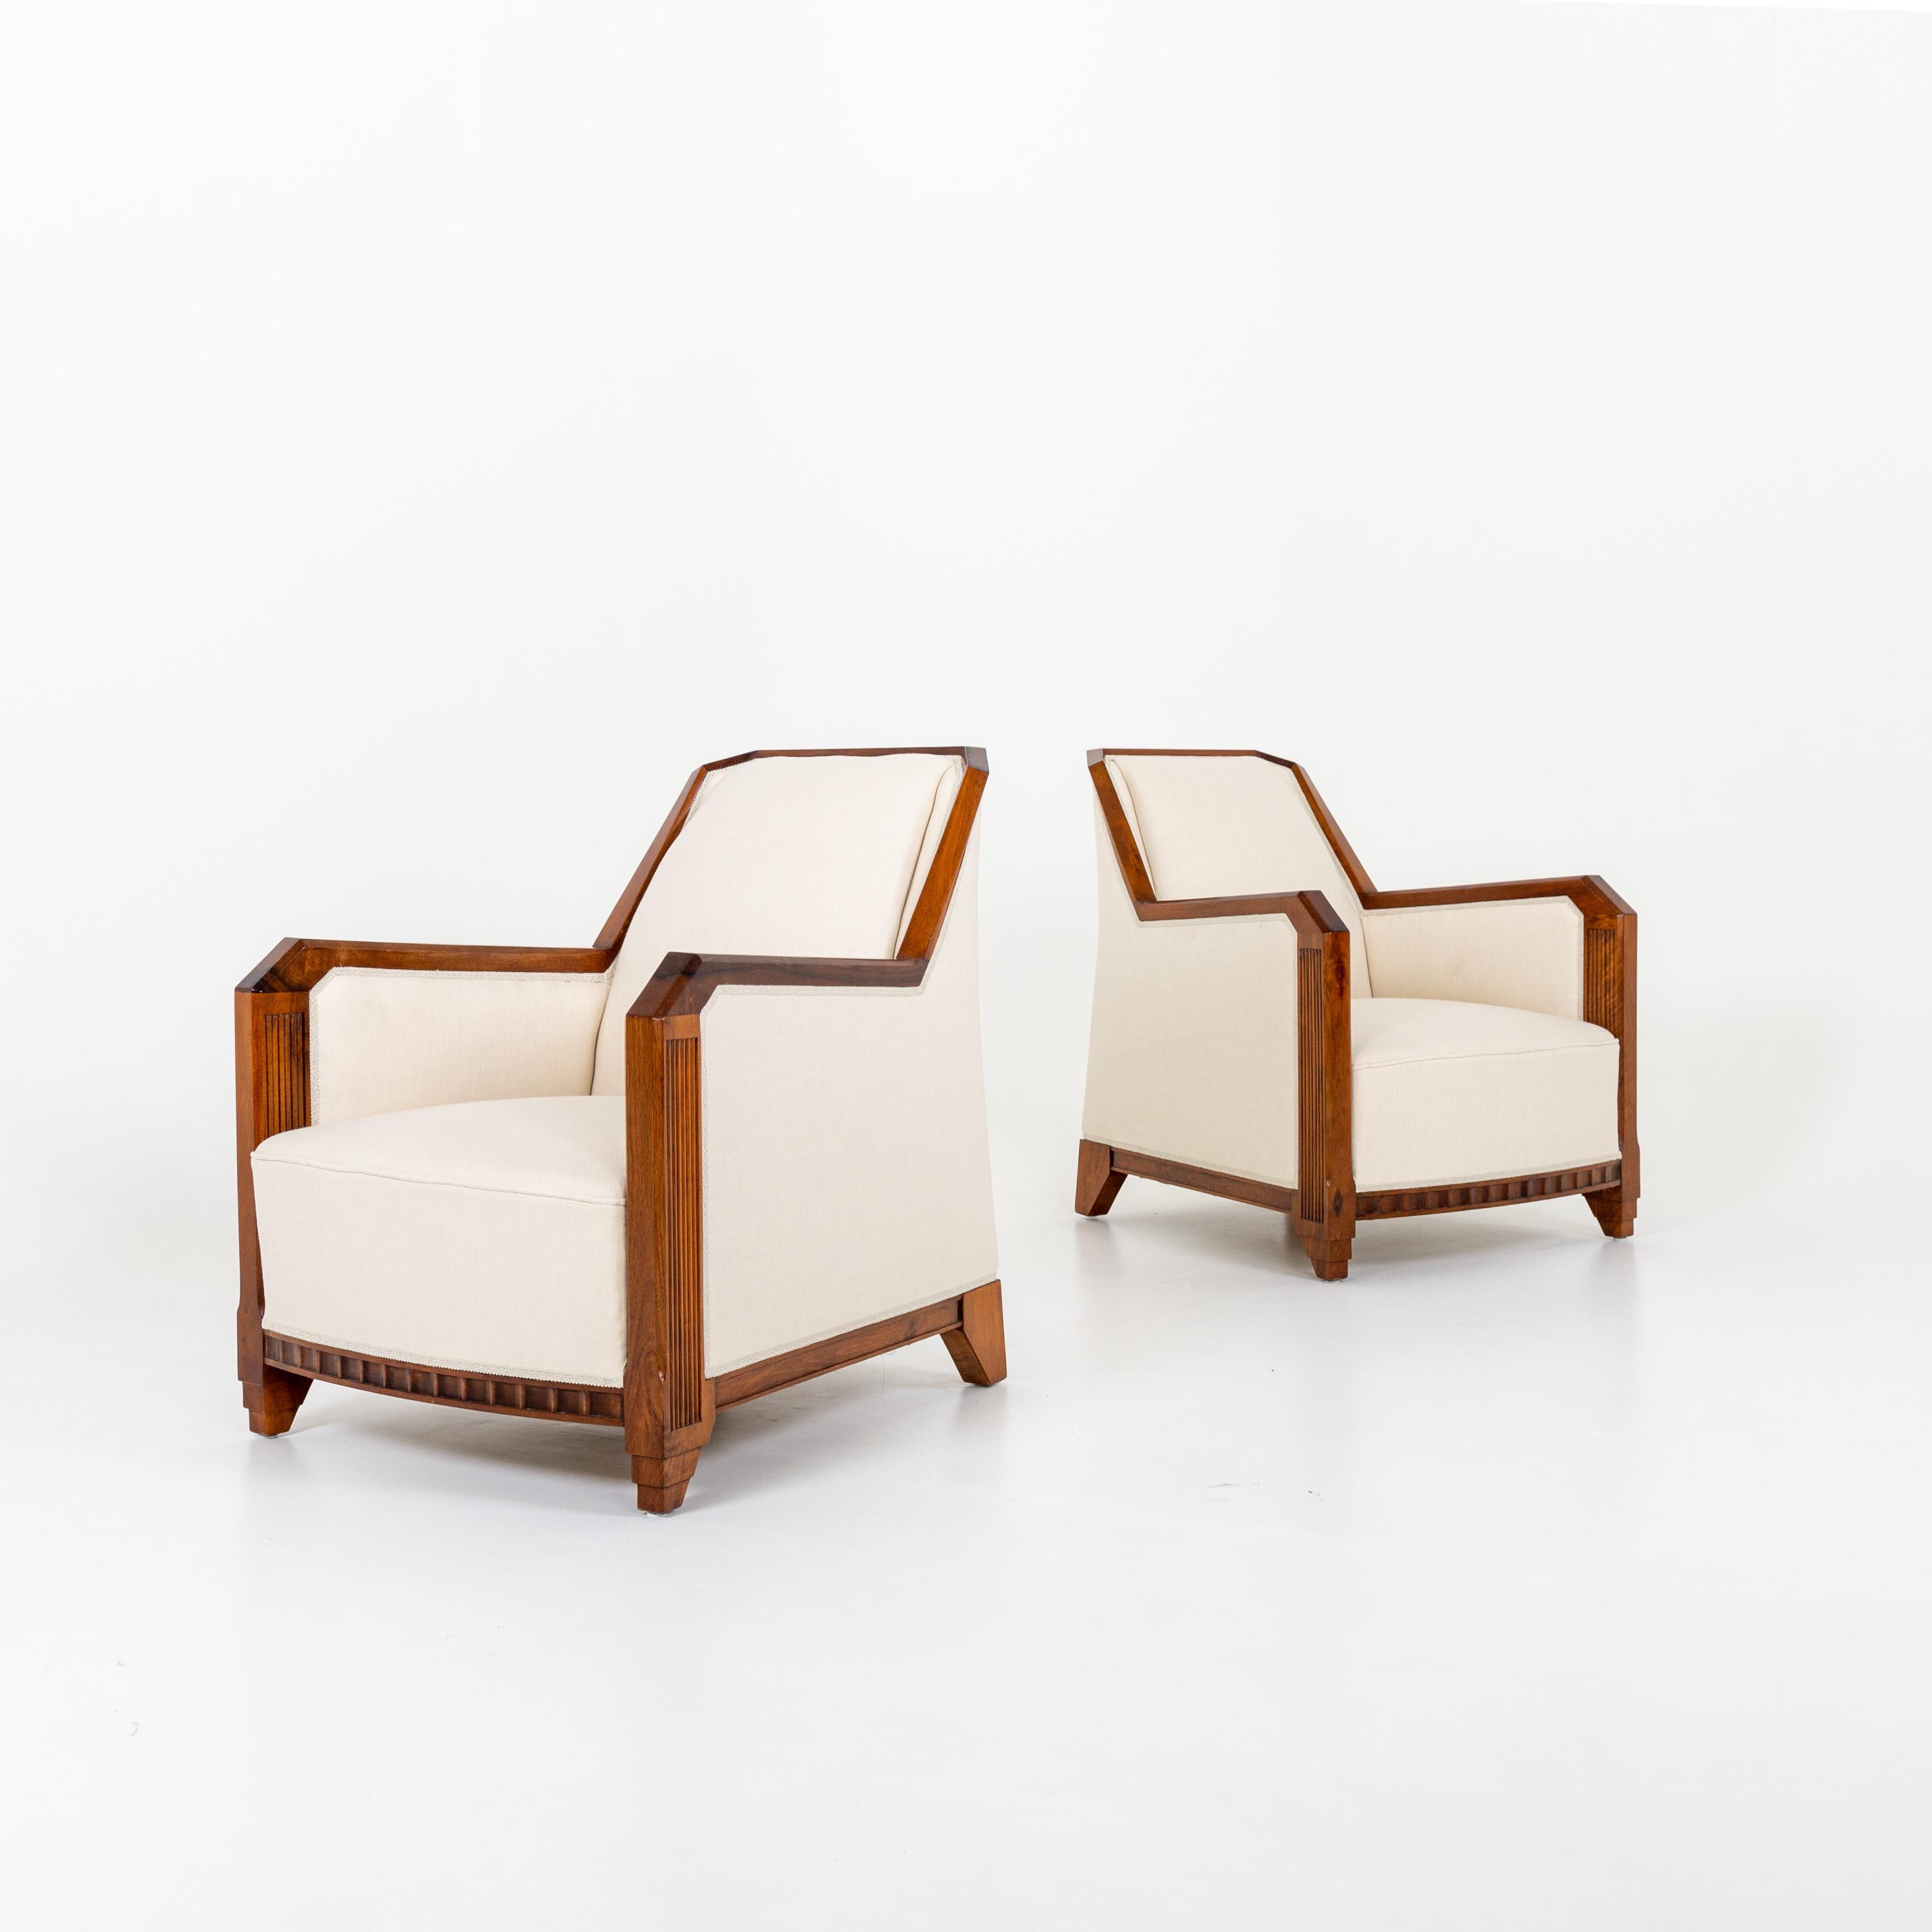 A pair of Art Deco club chairs attributed to Maurice Dufrene. 
Walnut with carved details.